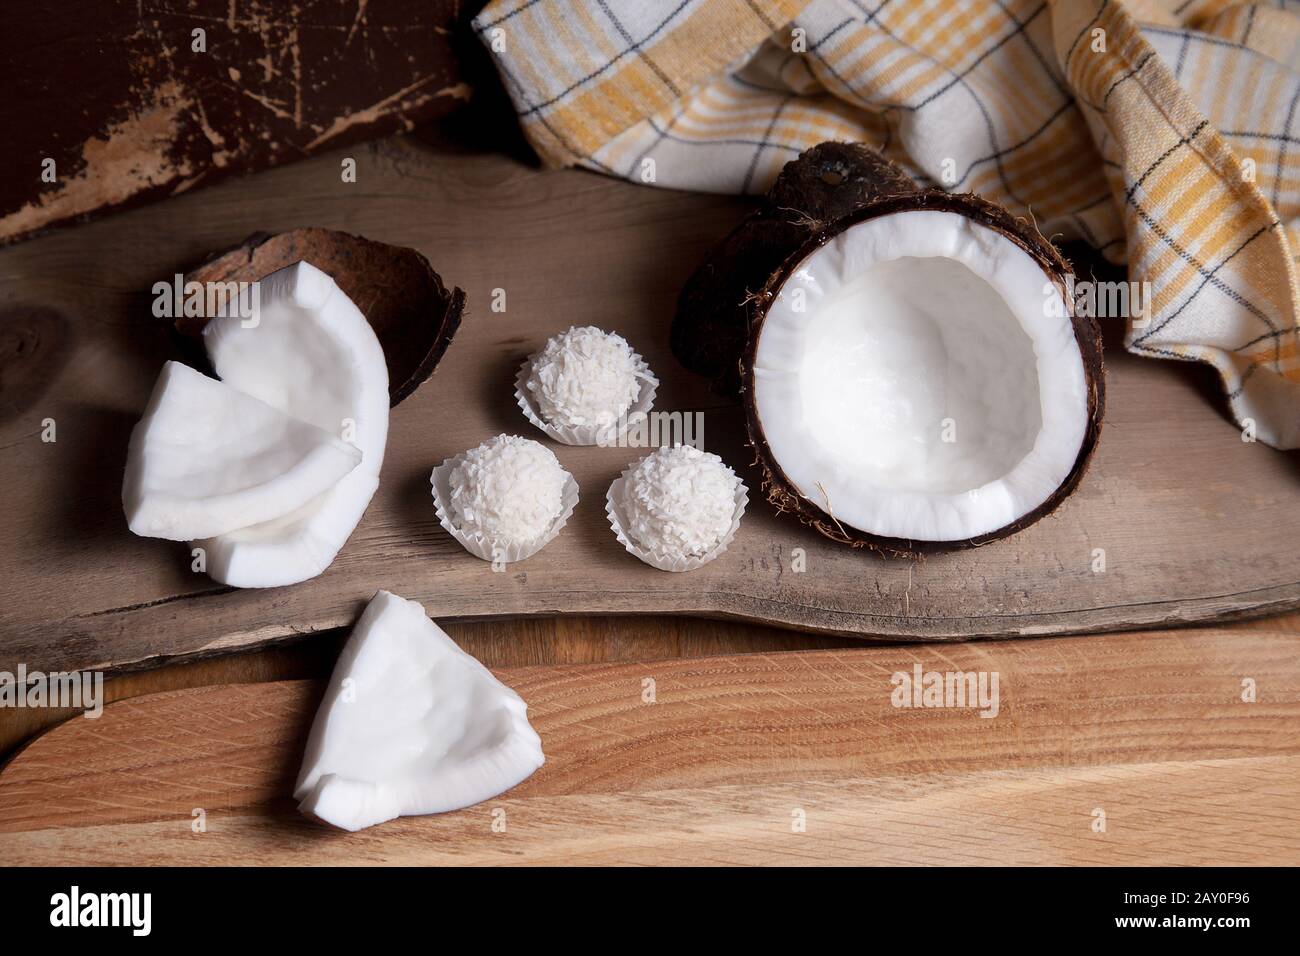 Coconut and sweet chocolate coconut truffles. Coconut shell, coconut flakes, small pieces of crashed nut and white chocolate coconut sweets on a woode Stock Photo